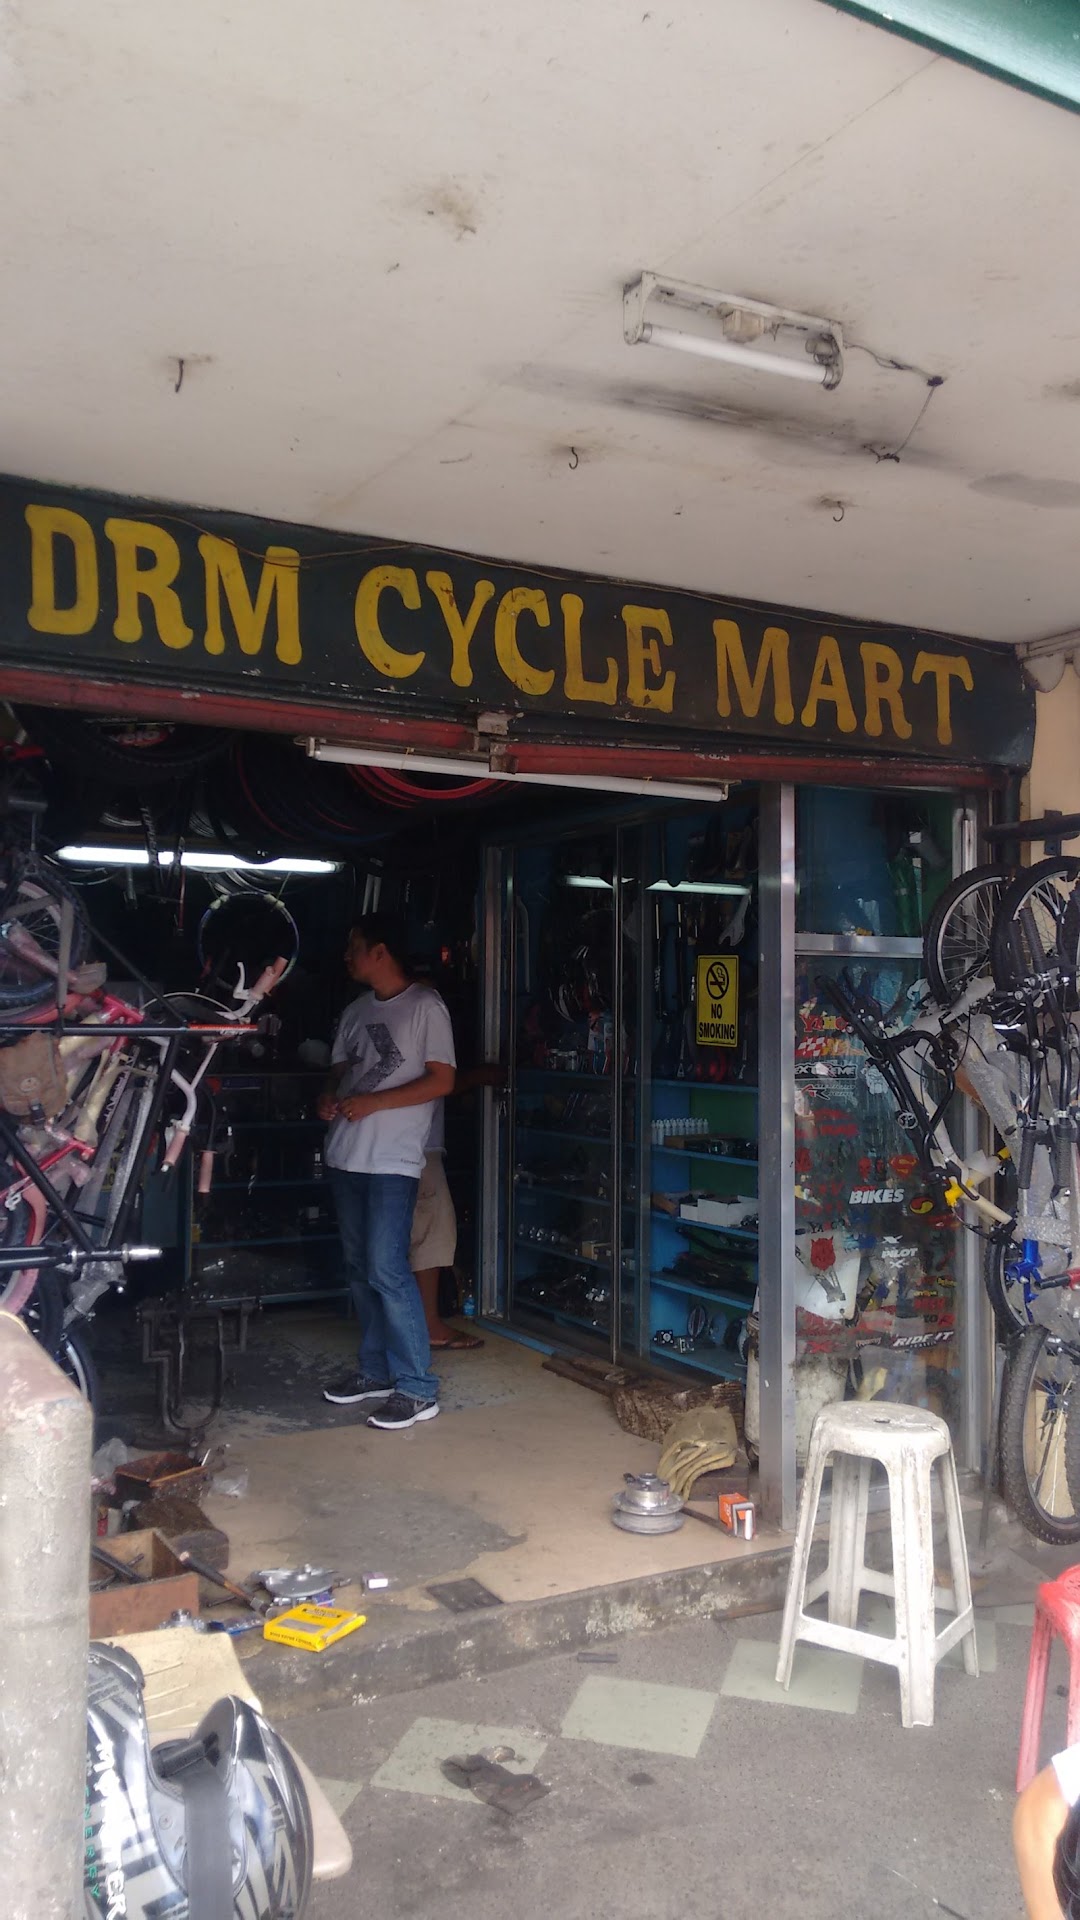 DRM Cycle Mart